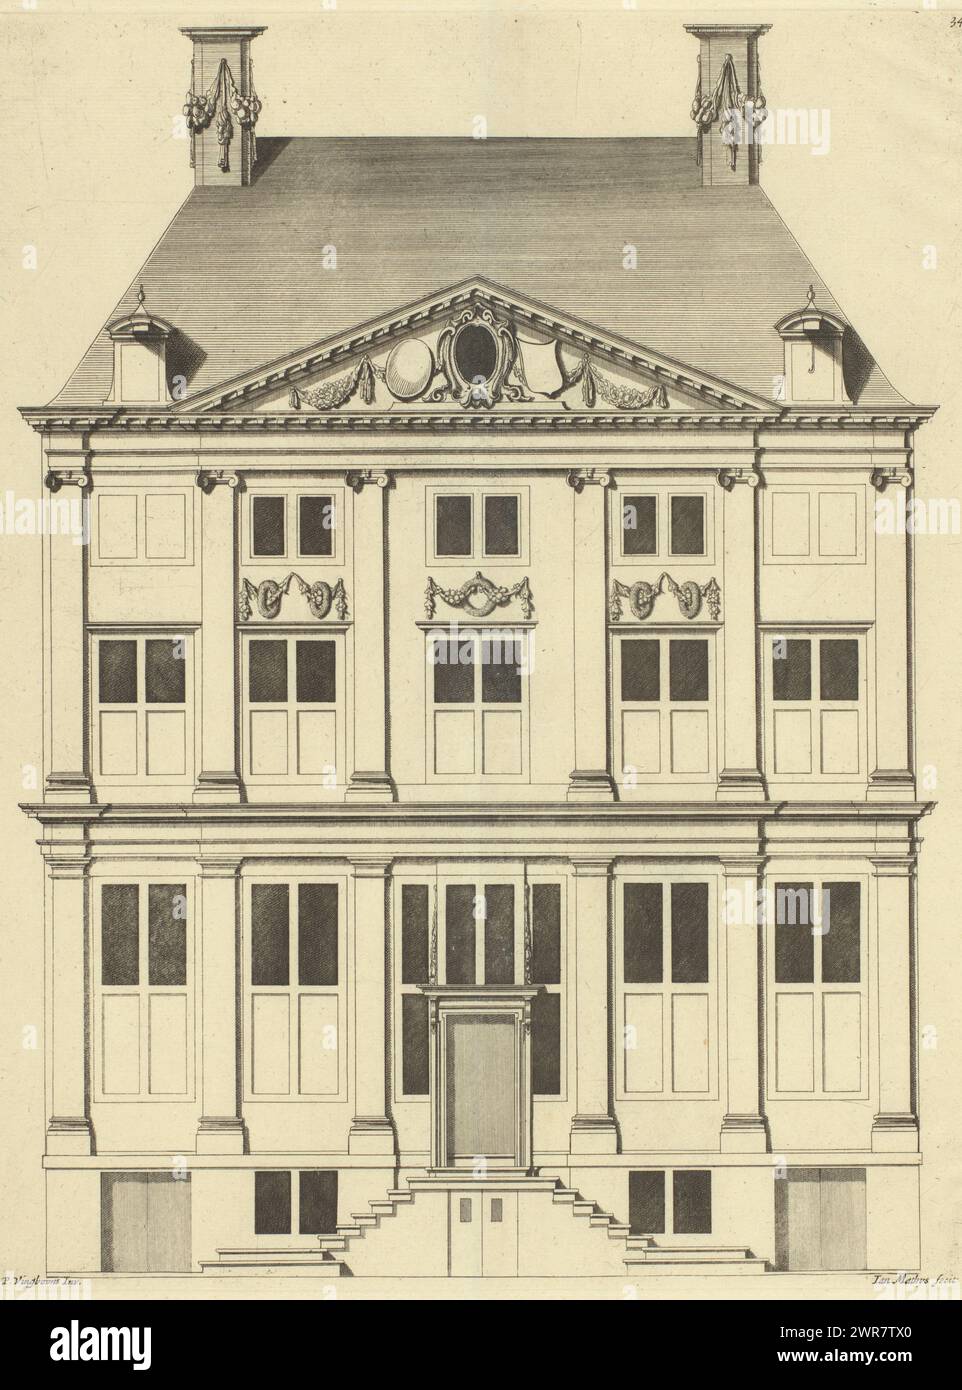 Facade of a house in Amsterdam, Front of the house at Herengracht 386 in Amsterdam, which was commissioned by Karel Gerards and designed by Philips Vingboons., print maker: Jan Matthysz., after design by: Philips Vinckboons (II), Amsterdam, 1674, paper, etching, engraving, height 378 mm × width 290 mm, print Stock Photo